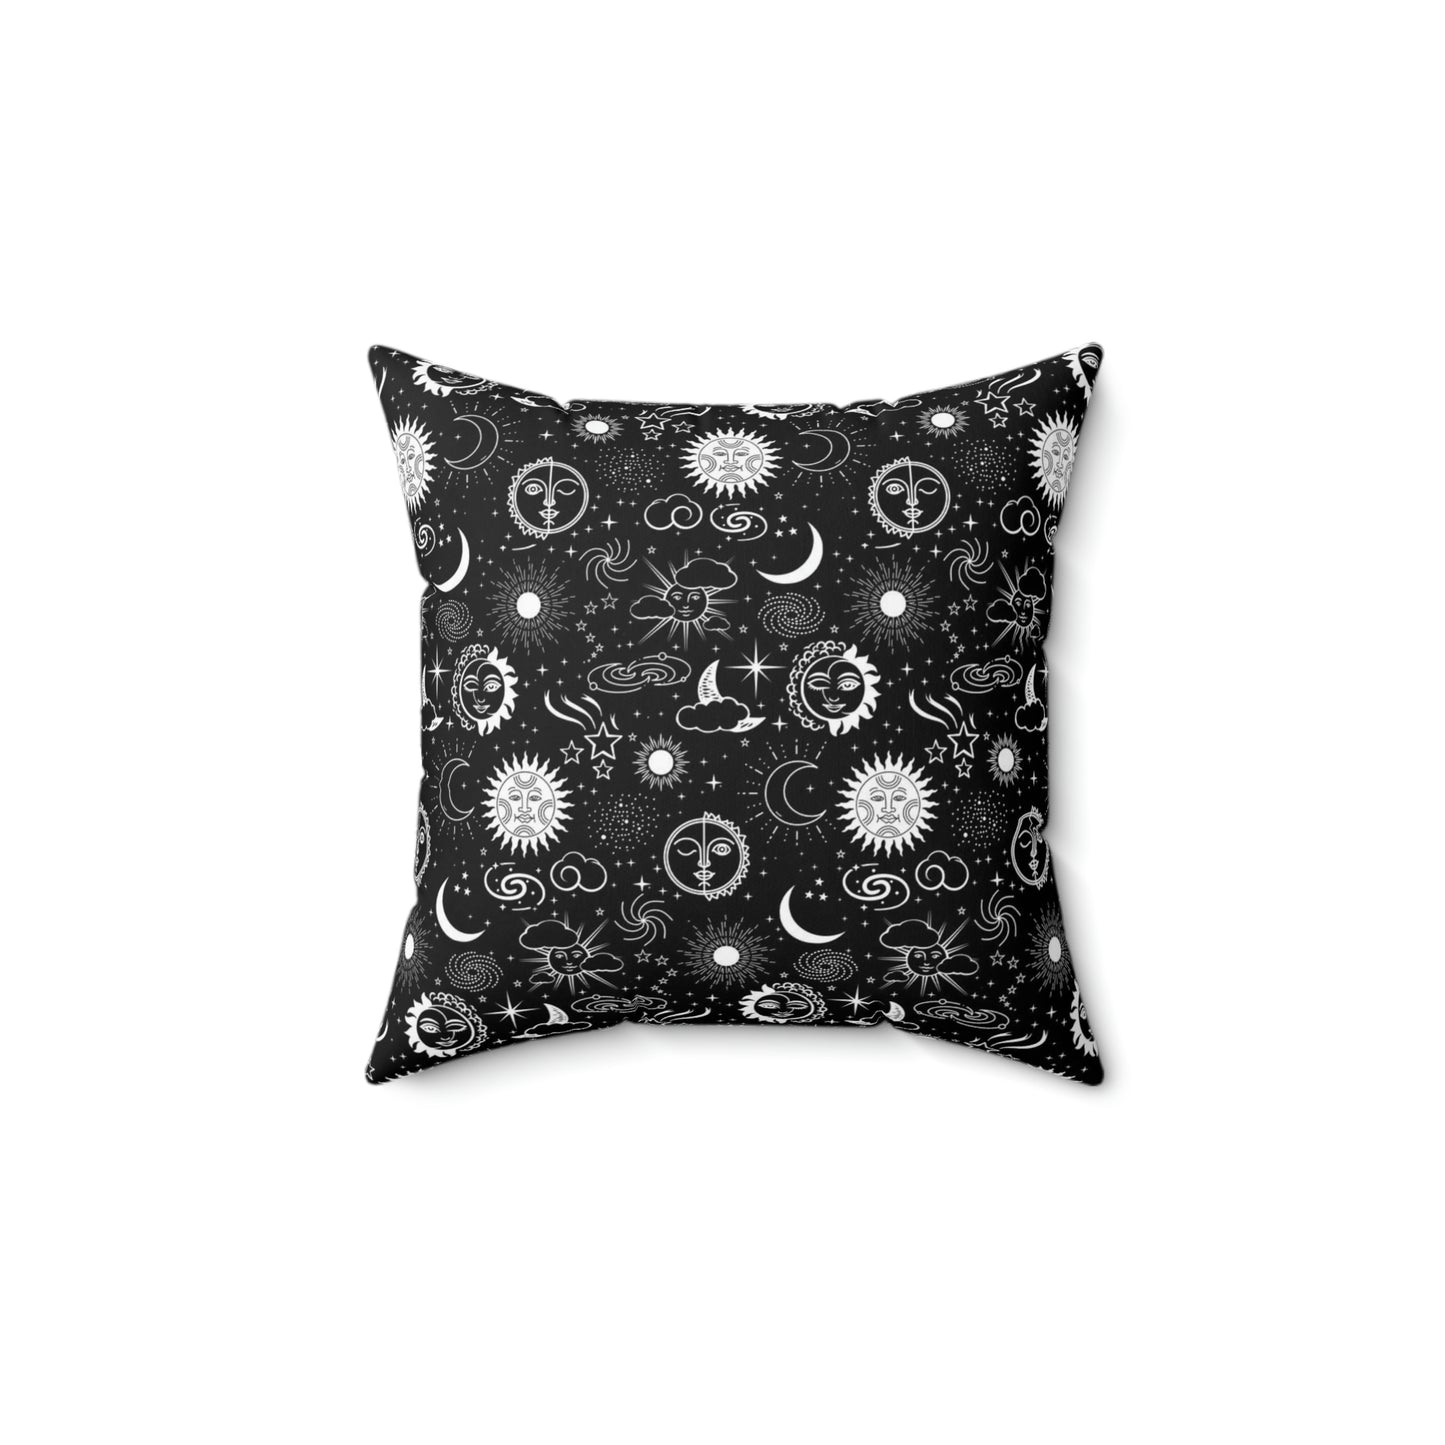 Celestial Black White Faux Suede Square Pillow Case With Zipper Suns Moons Stars